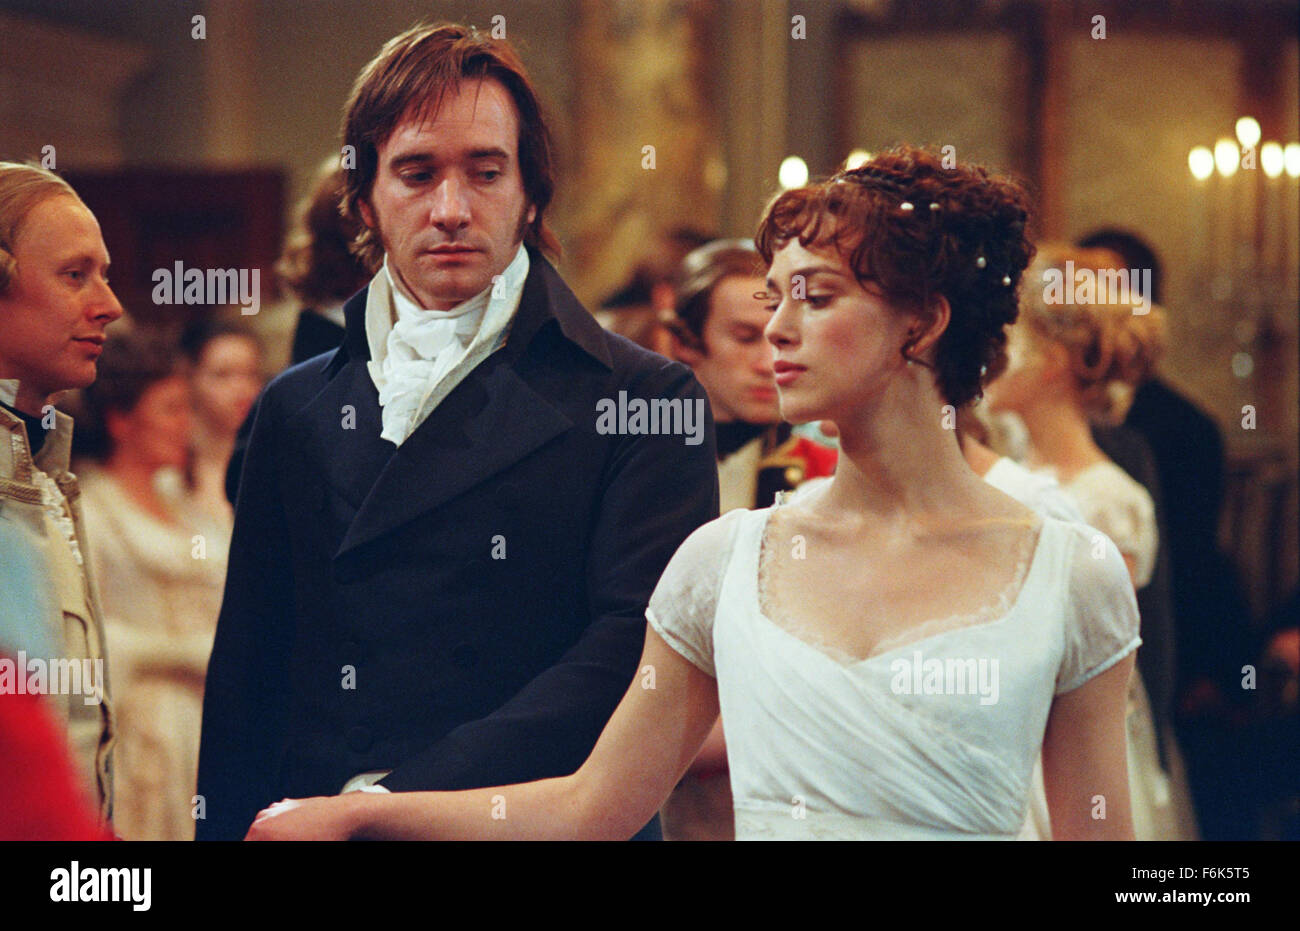 RELEASE DATE: November 23, 2005. MOVIE TITLE: Pride and Prejudice. STUDIO: Focus Features. PLOT: The story is based on Jane Austen's novel about five sisters - Jane, Elizabeth, Mary, Kitty and Lydia Bennet - in Georgian England. Their lives are turned upside down when a wealthy young man (Mr. Bingley) and his best friend (Mr. Darcy) arrive in their neighborhood. PICTURED: MATTHEW MACFADYEN (left) as Mr. Darcy and KEIRA KNIGHTLEY (right) as Elizabeth Bennet. Stock Photo